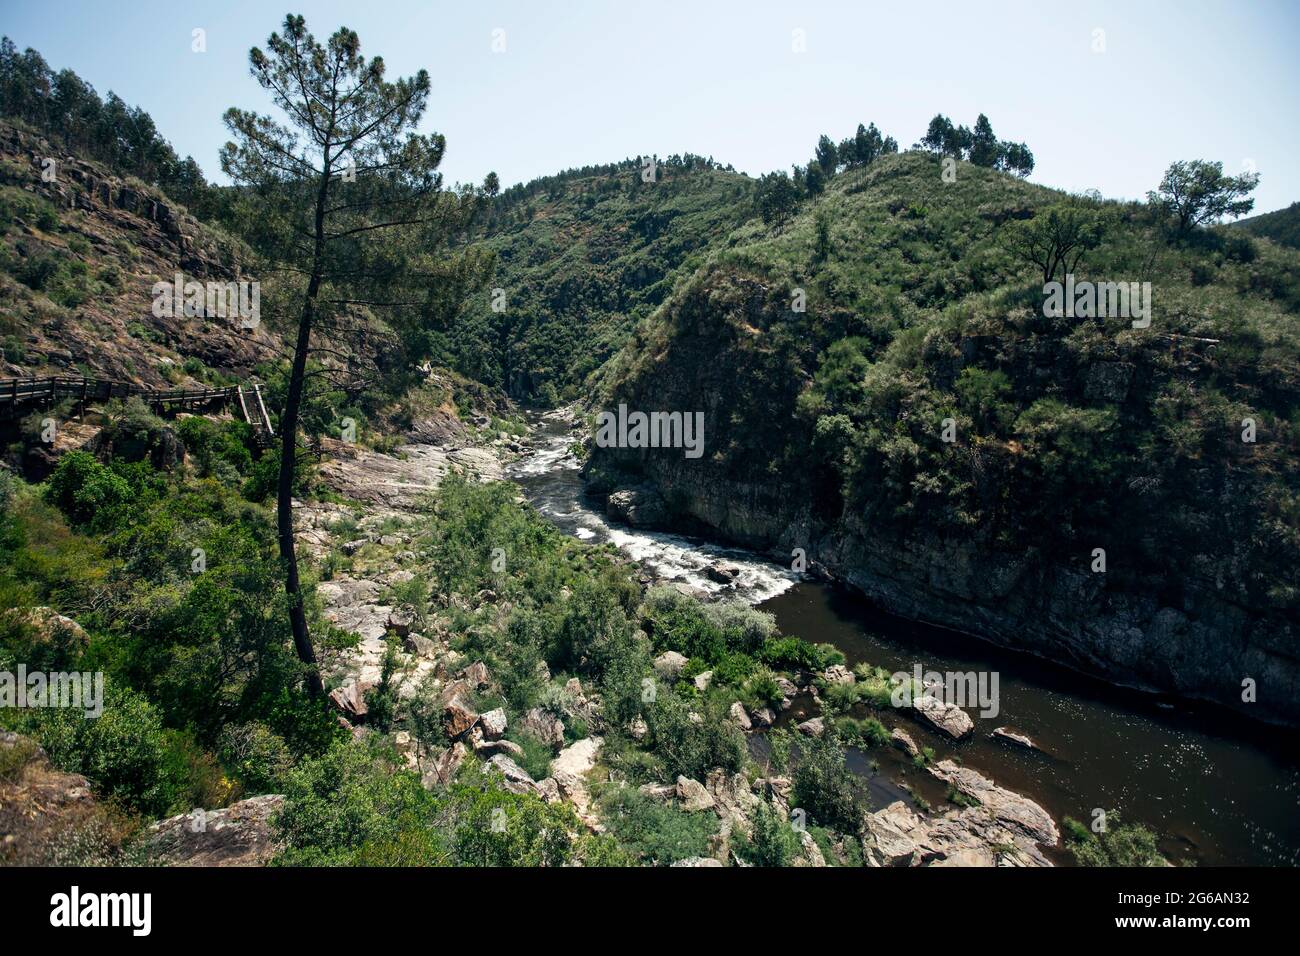 View of the Paiva river in the municipality of Arouca, Nord of Portugal. Stock Photo